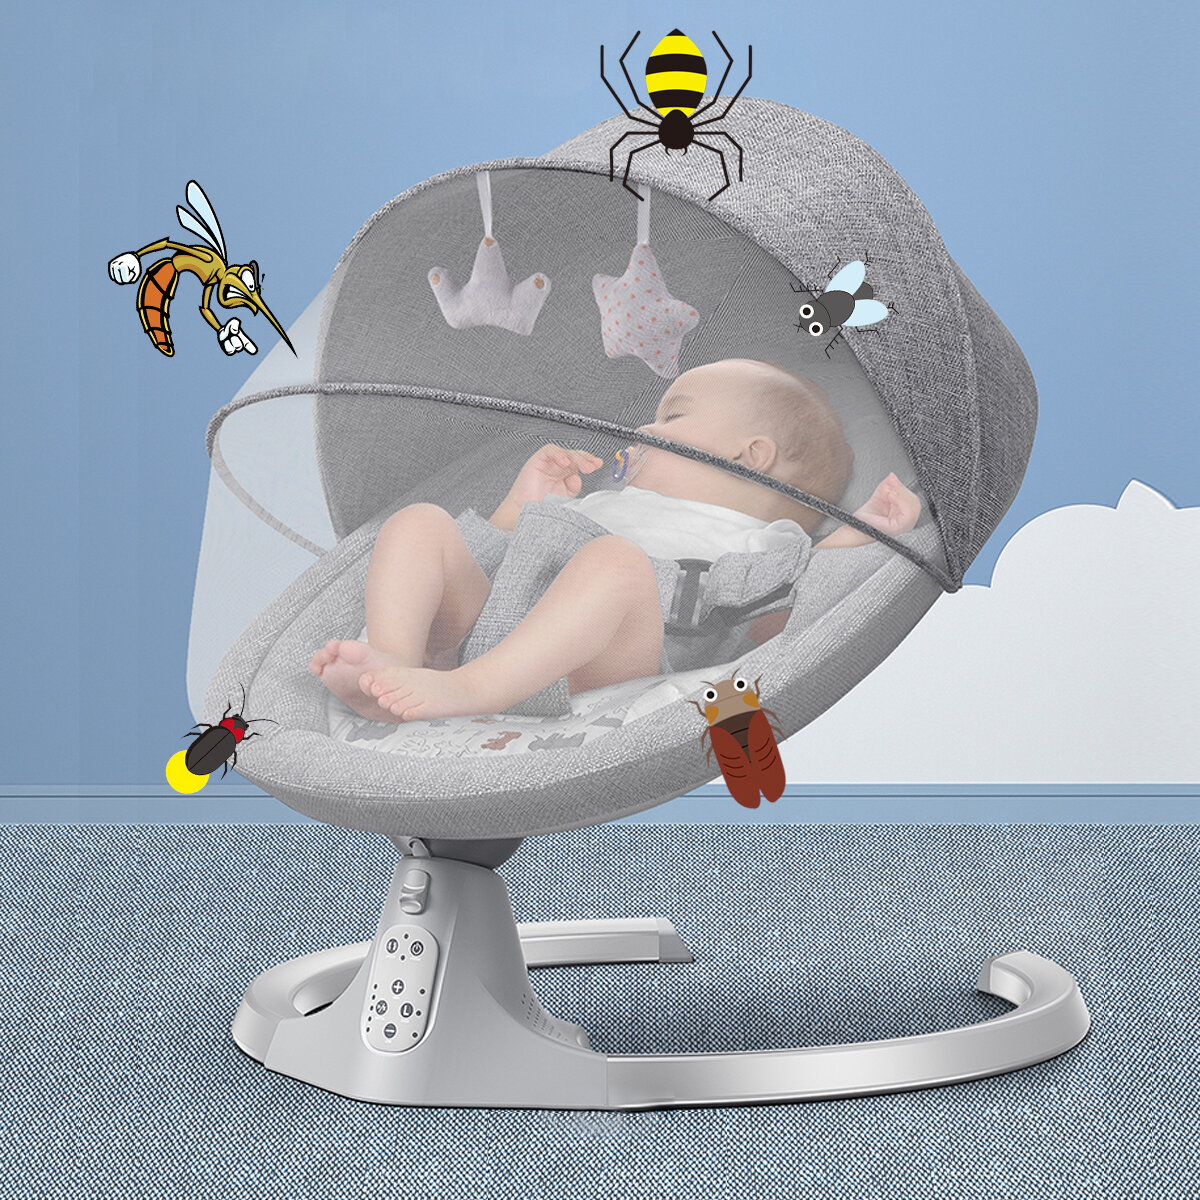 Baby bouncer, electric baby swing with music, usable from birth up to approx. 9 months, 0-18 kg load